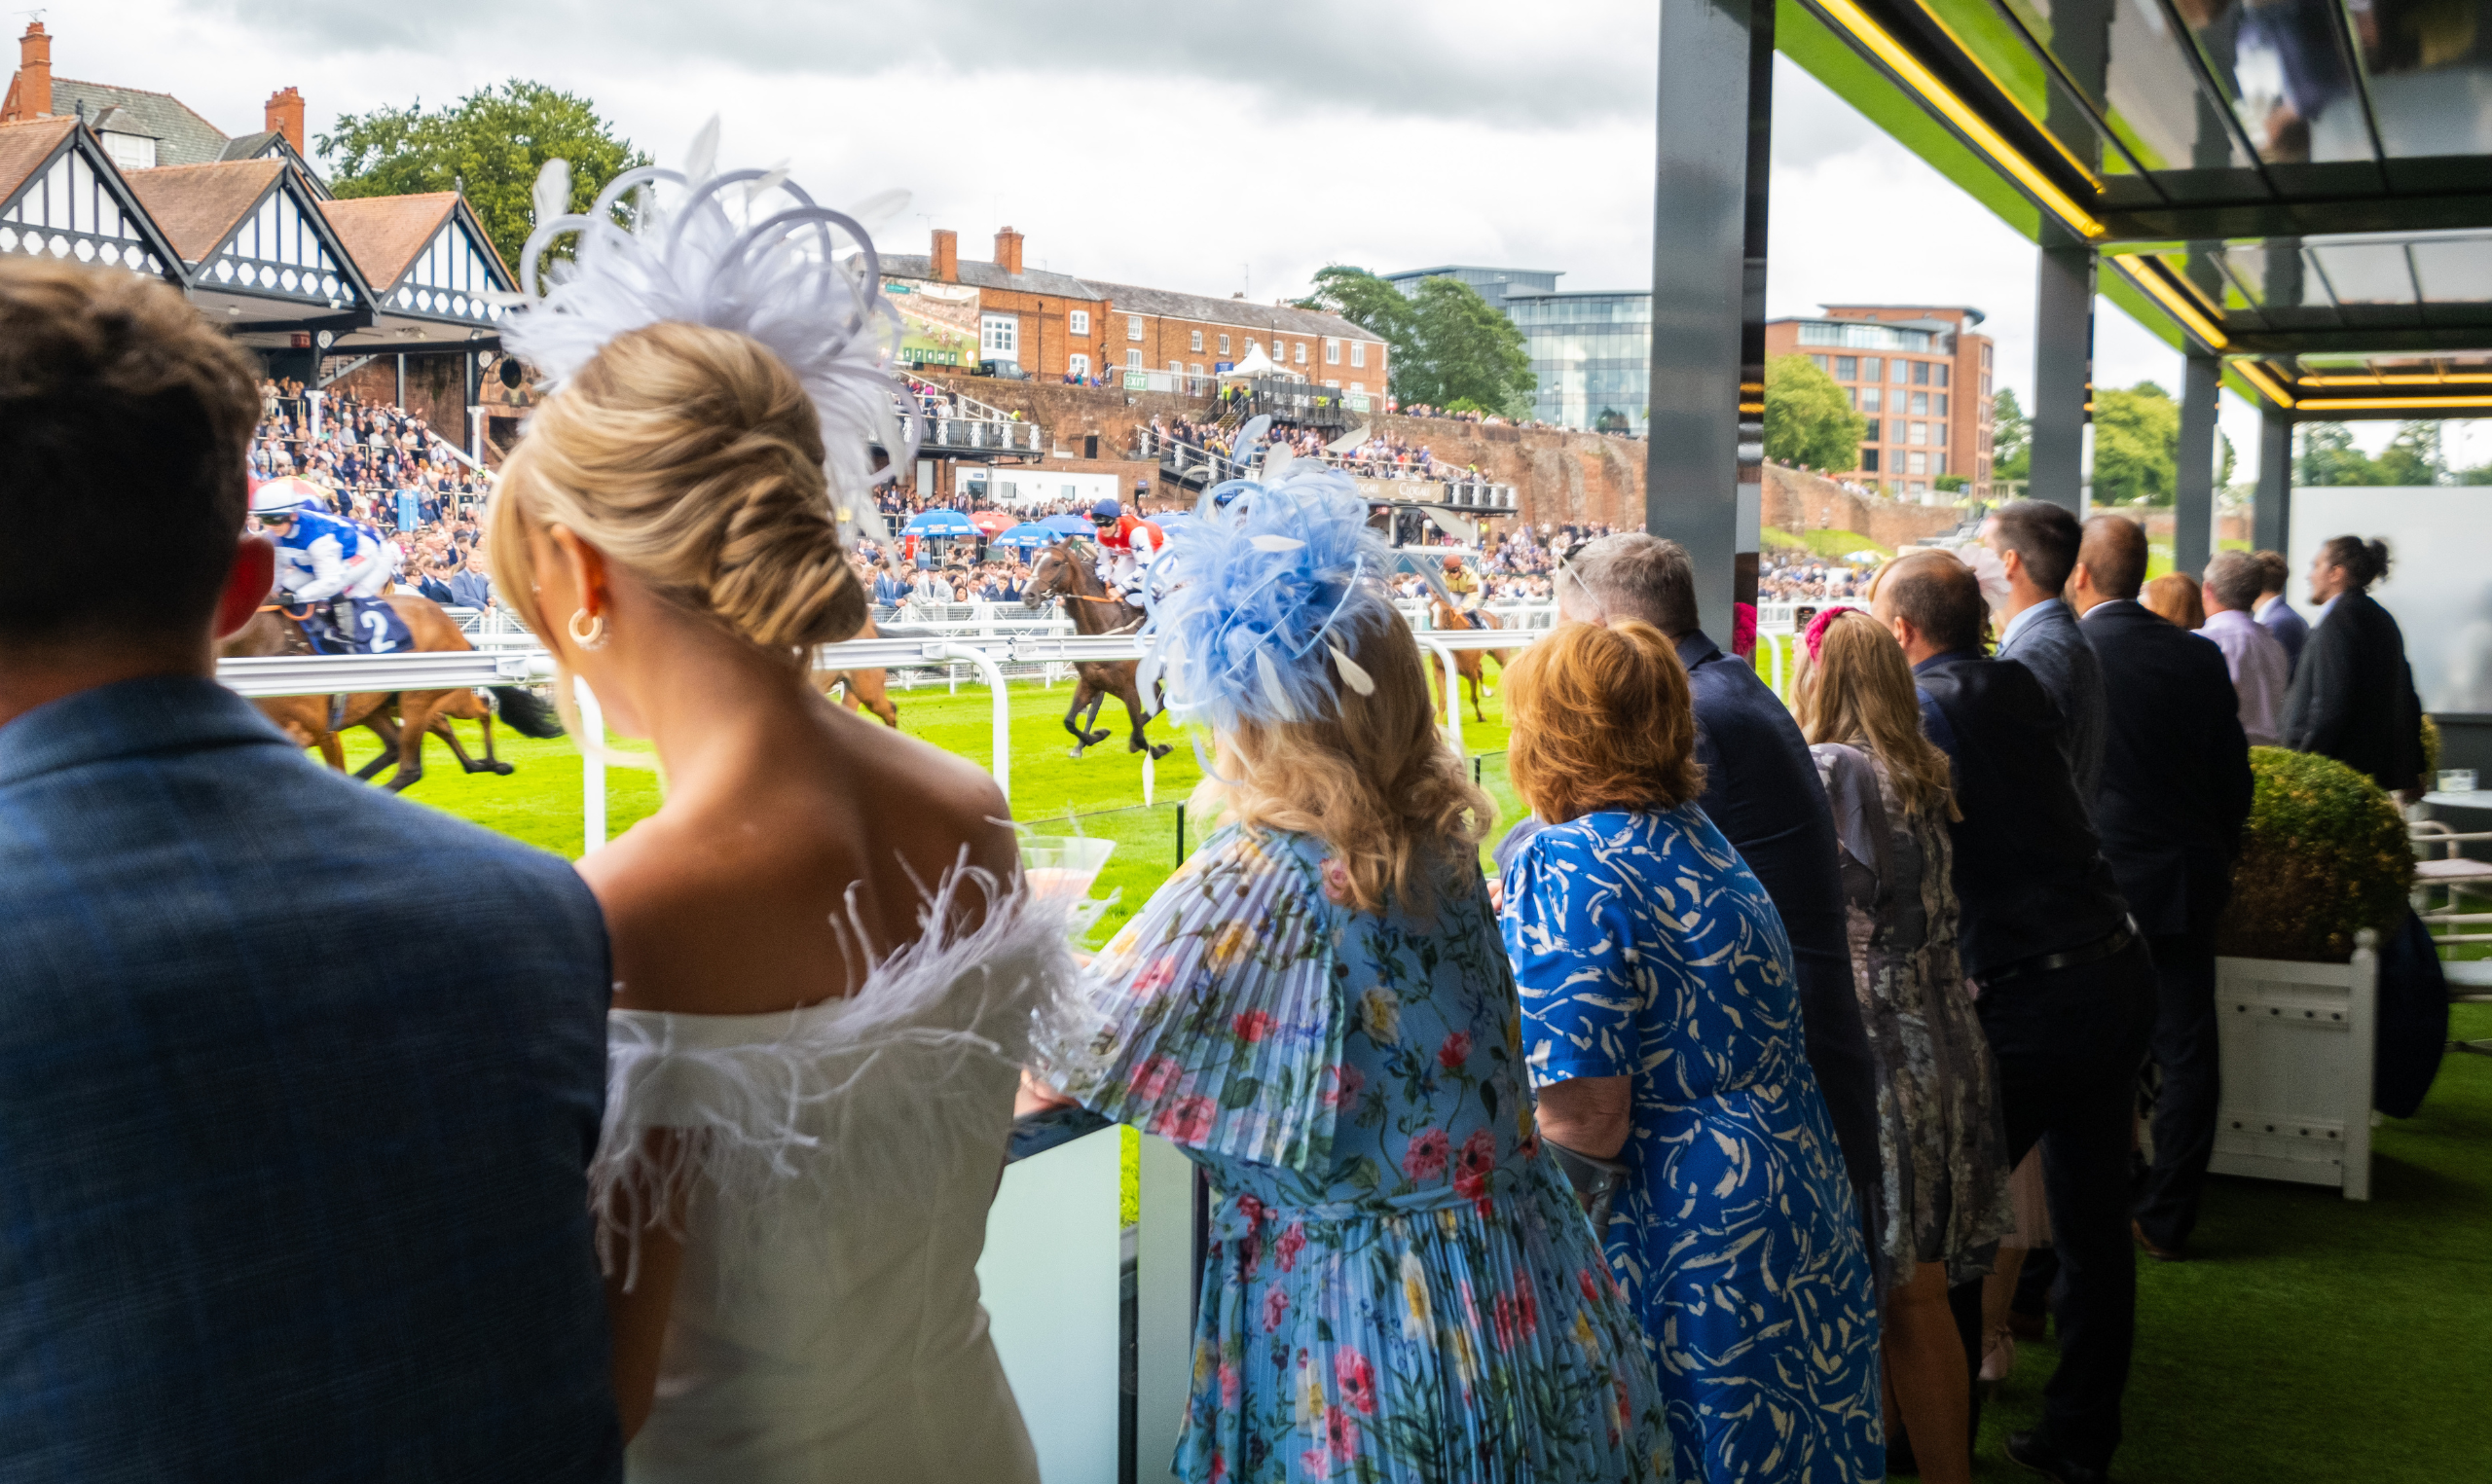 Types of Experiences at Chester Racecourse thumbnail image